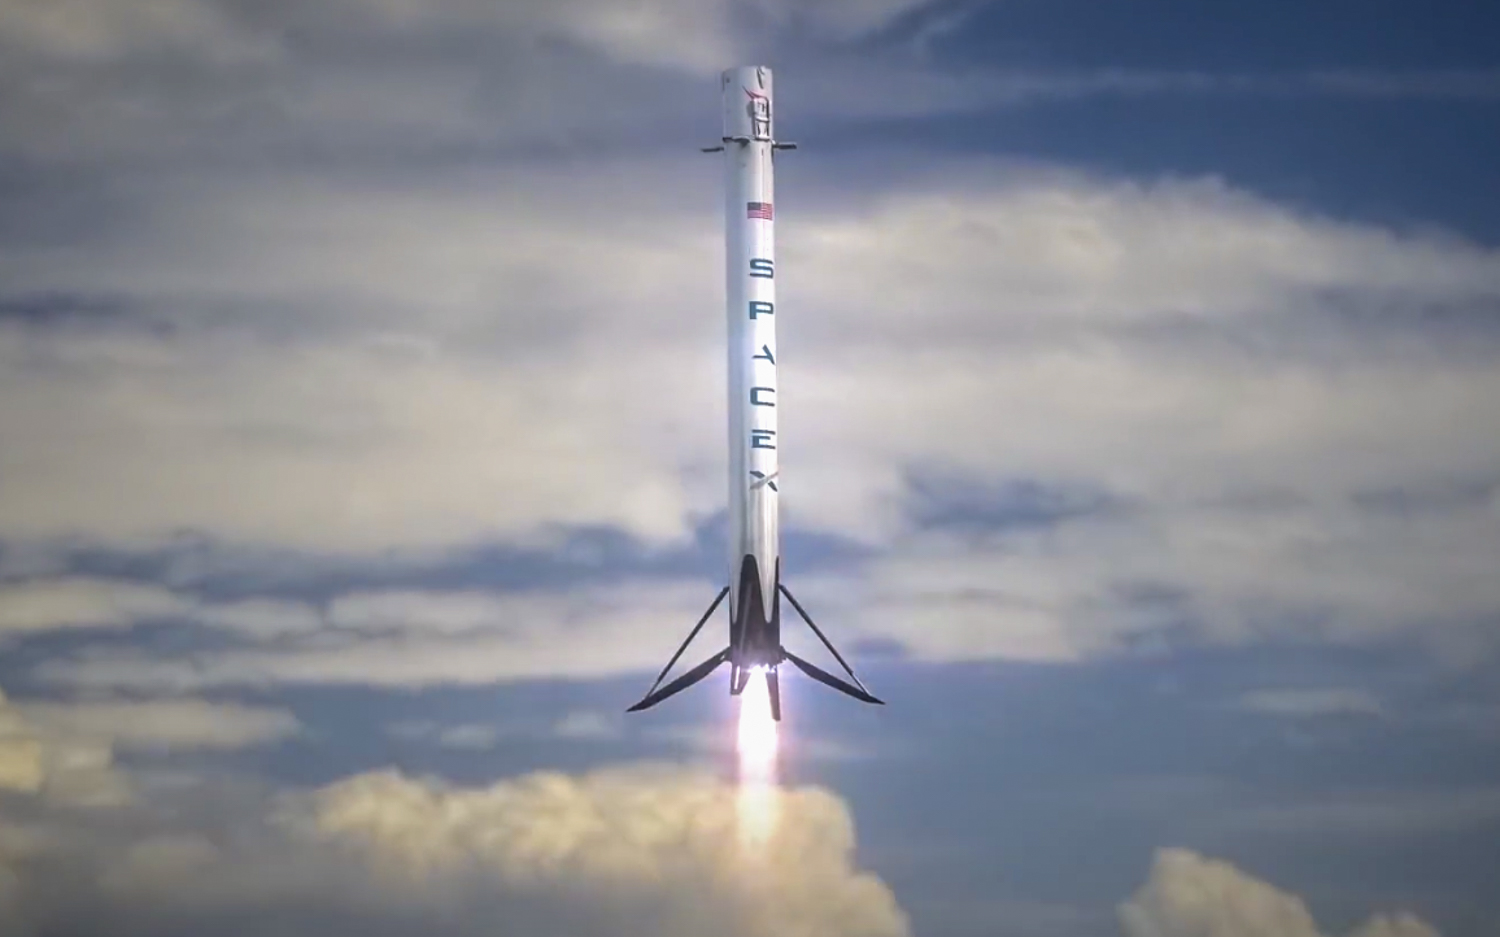 SpaceX lands Falcon9 only 6 months after an explosive trial